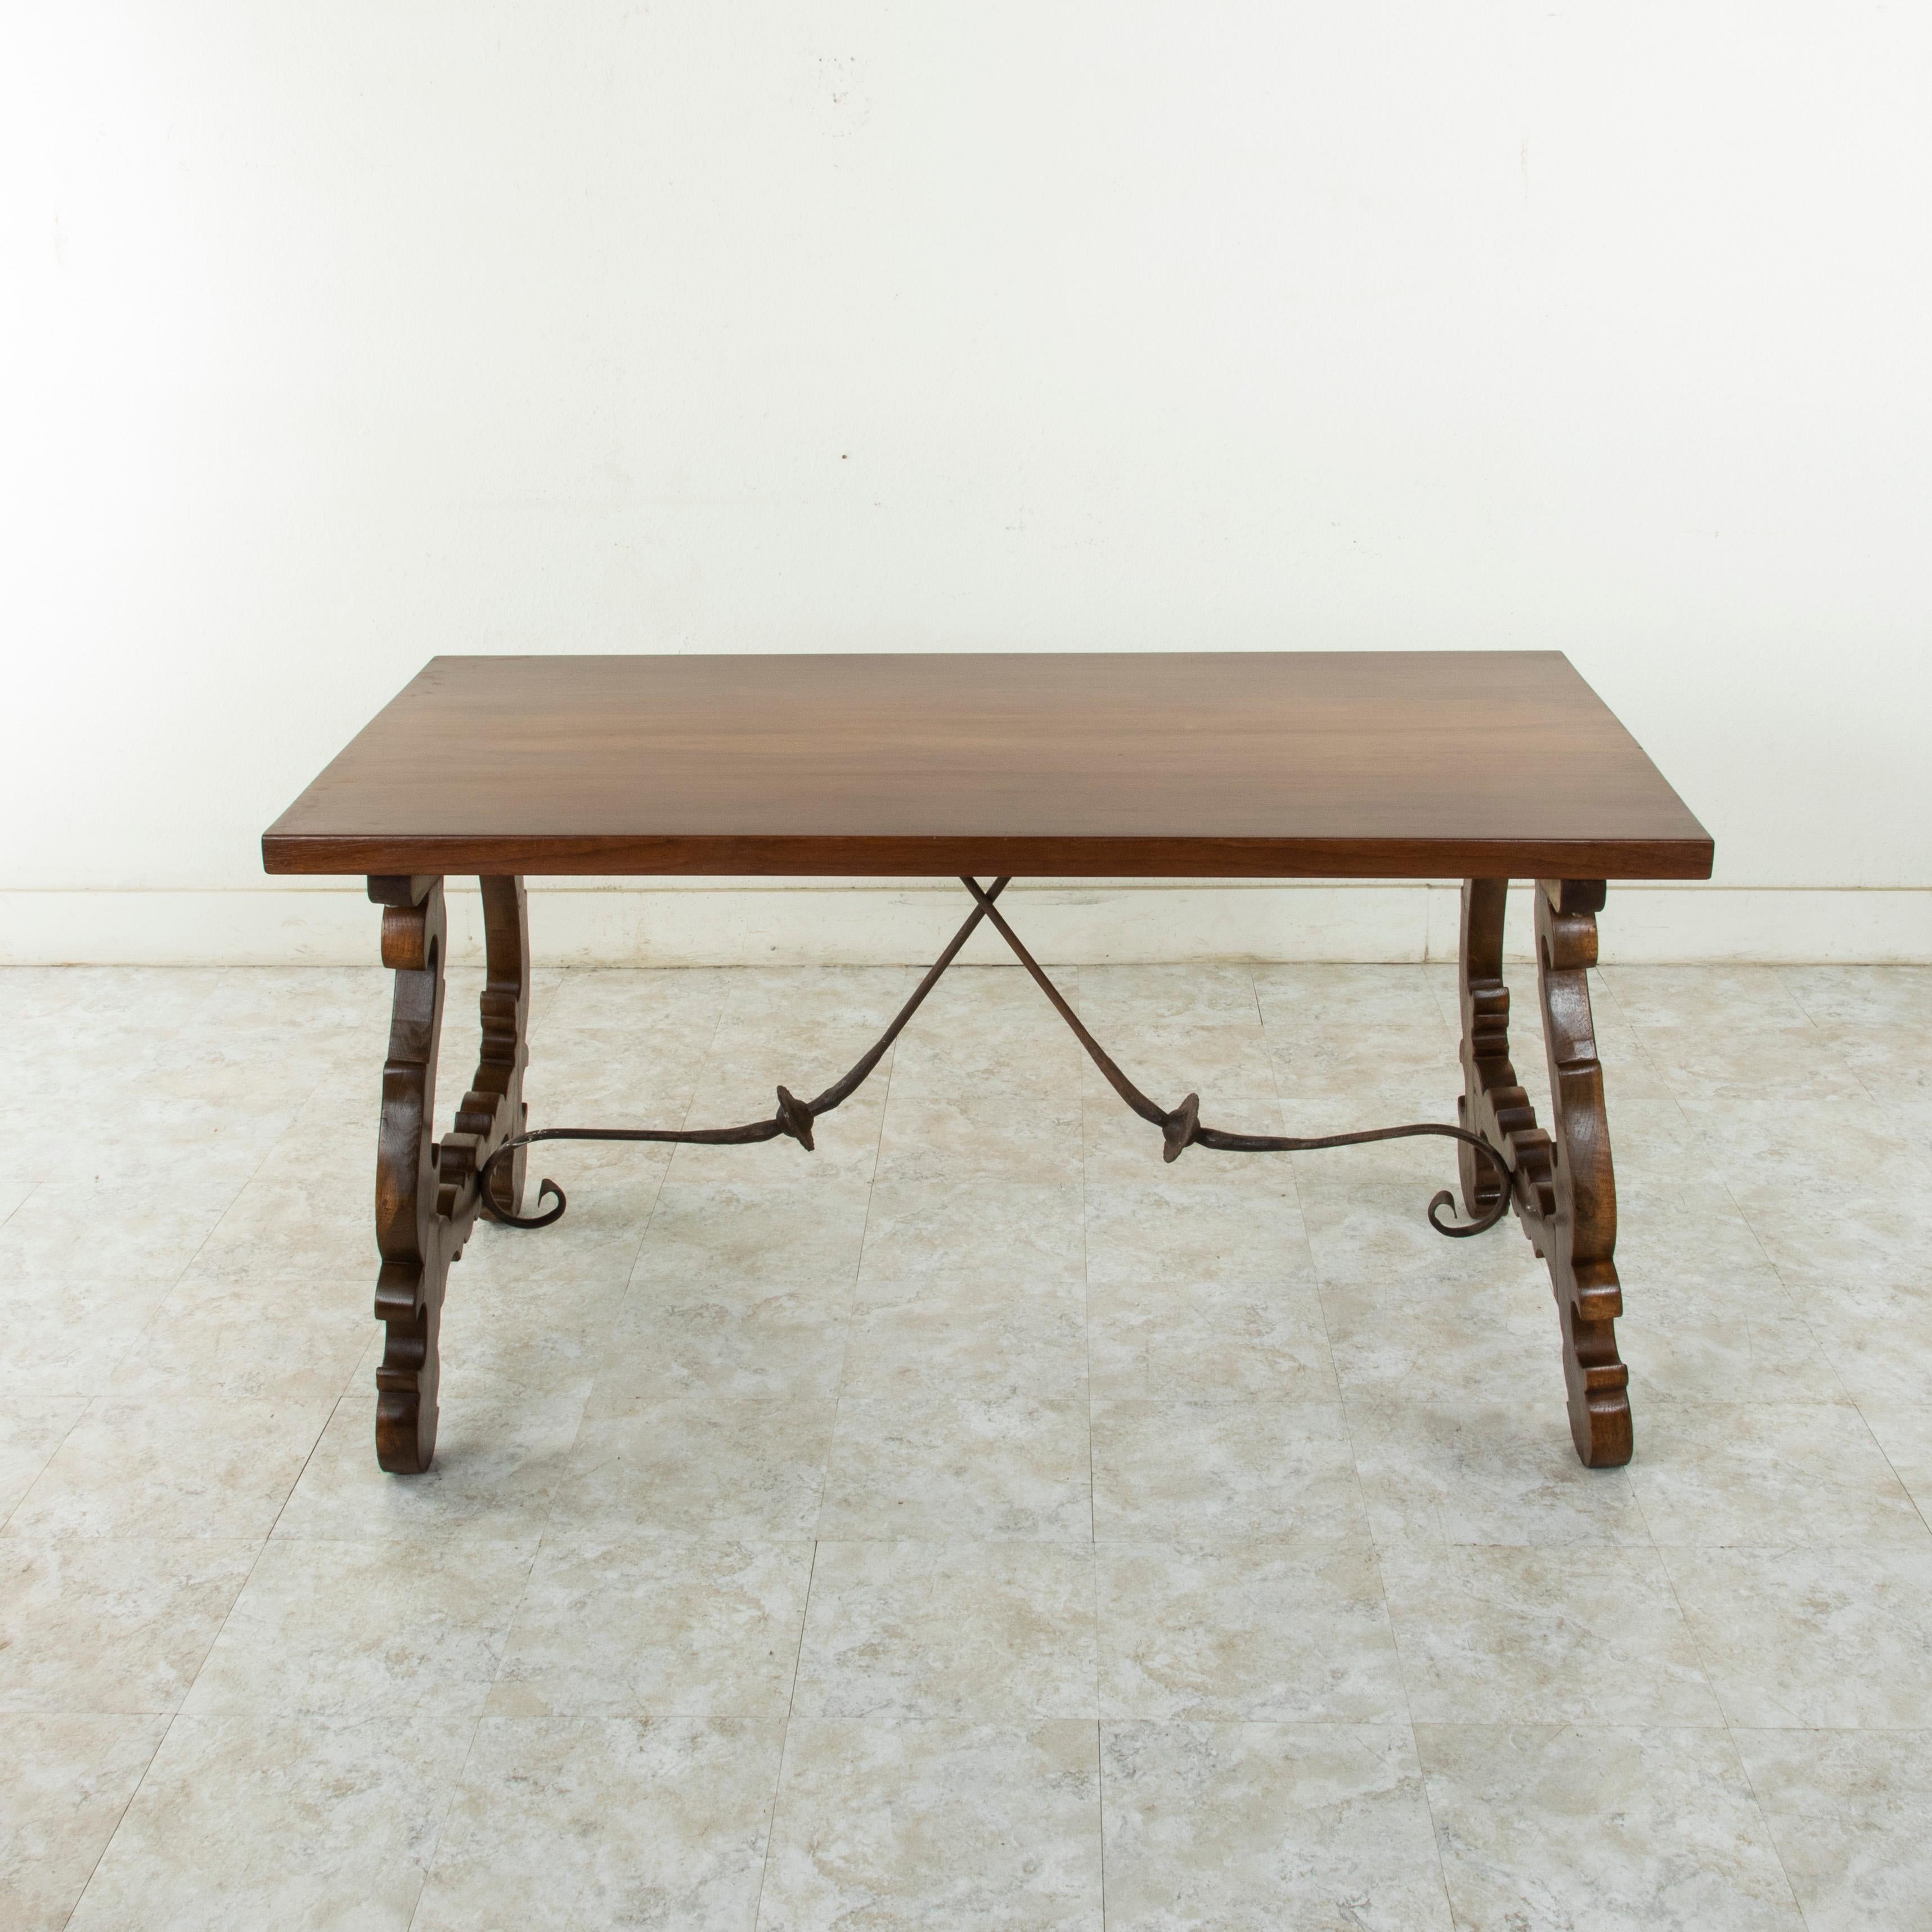 This beautiful artisan-made Spanish Renaissance style table or writing desk from the turn of the twentieth century features a solid amaranth or purple heart top made from a single plank with a width of 31.5 inches. A rare species of wood, the